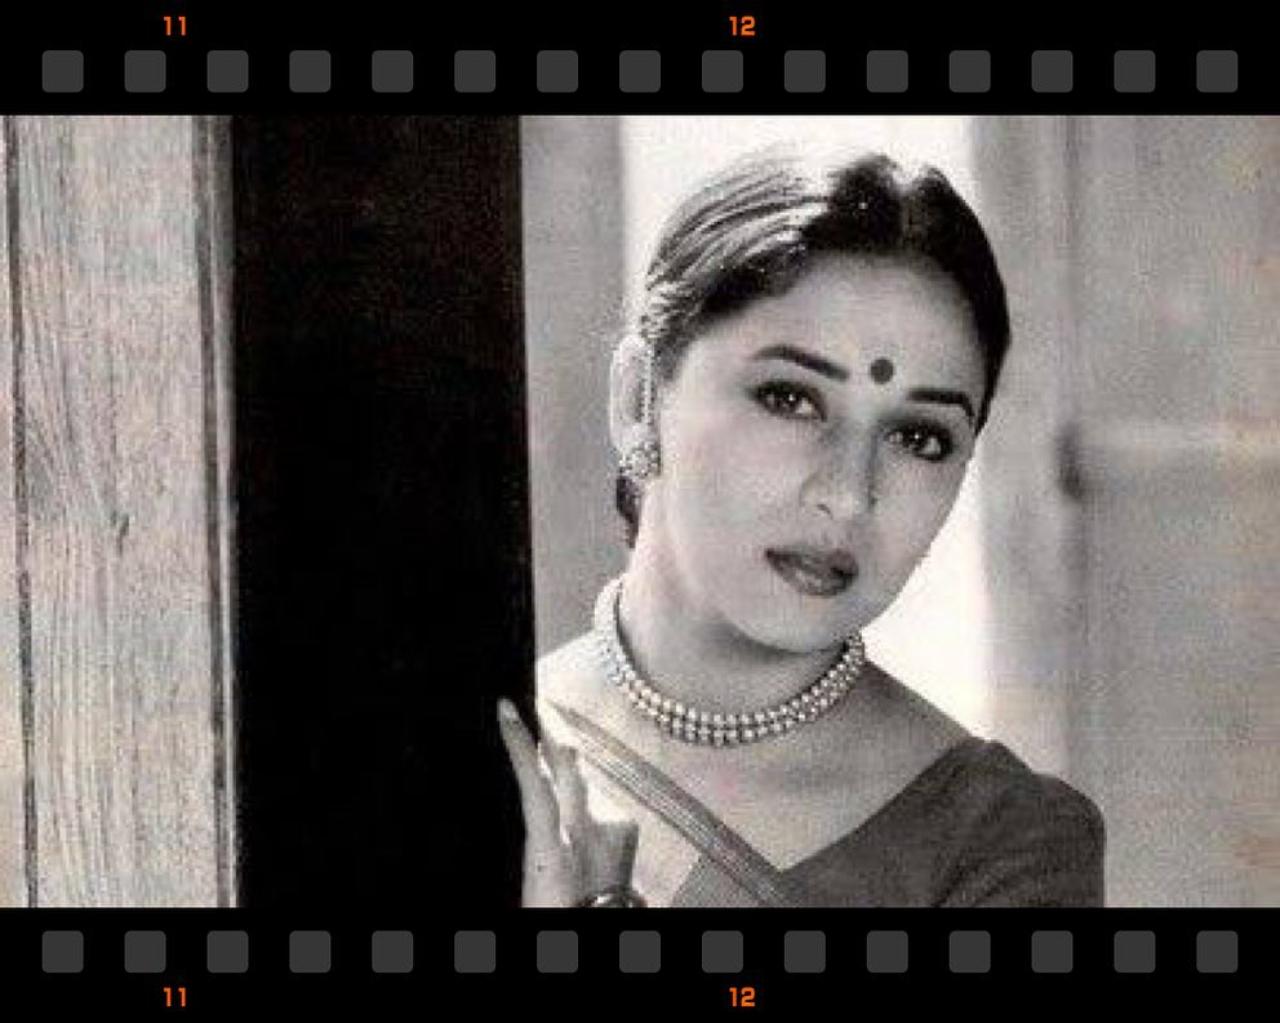 The film which is a commentary on social and gender injustice stars Madhuri Dixit, Shabana Azmi, Ayub Khan, Mohan Agashe, and Om Puri. 